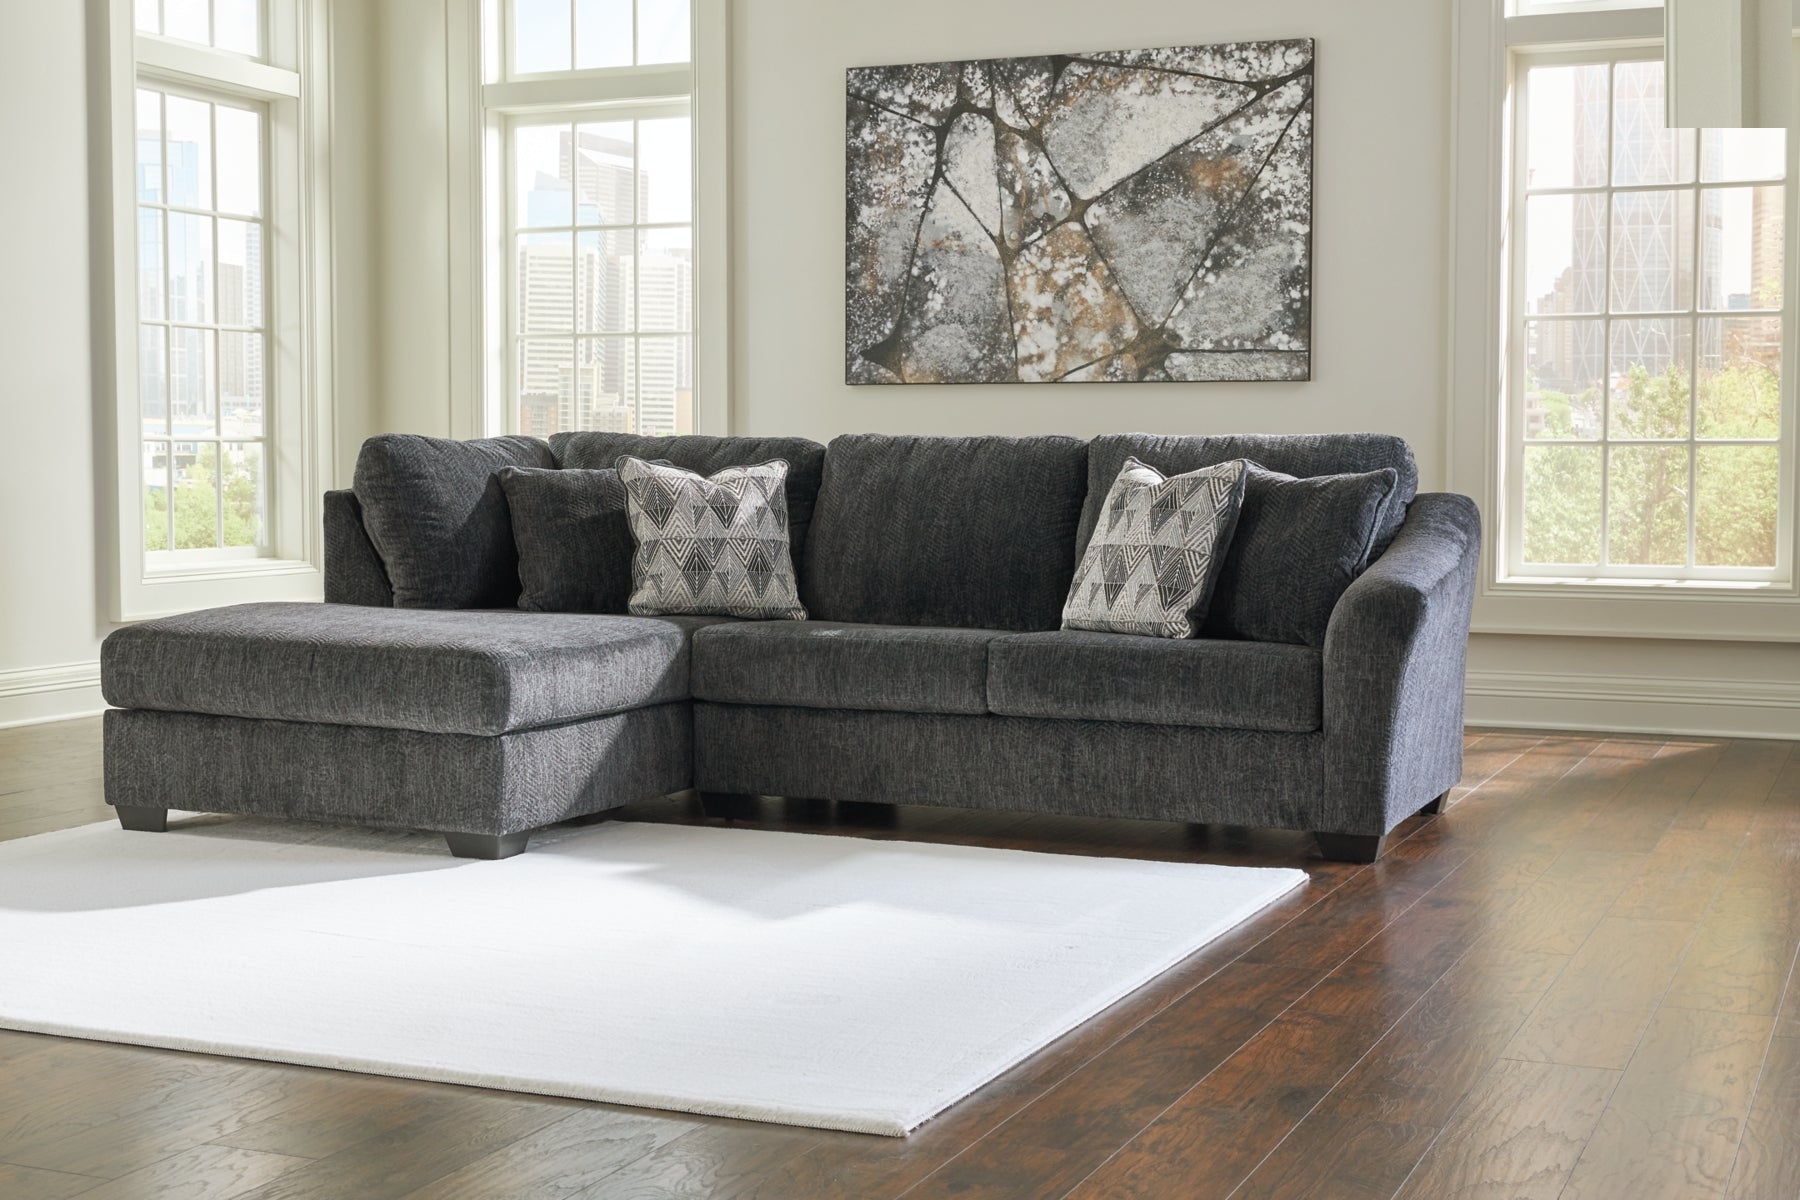 Biddeford 2-Piece Sectional with Ottoman